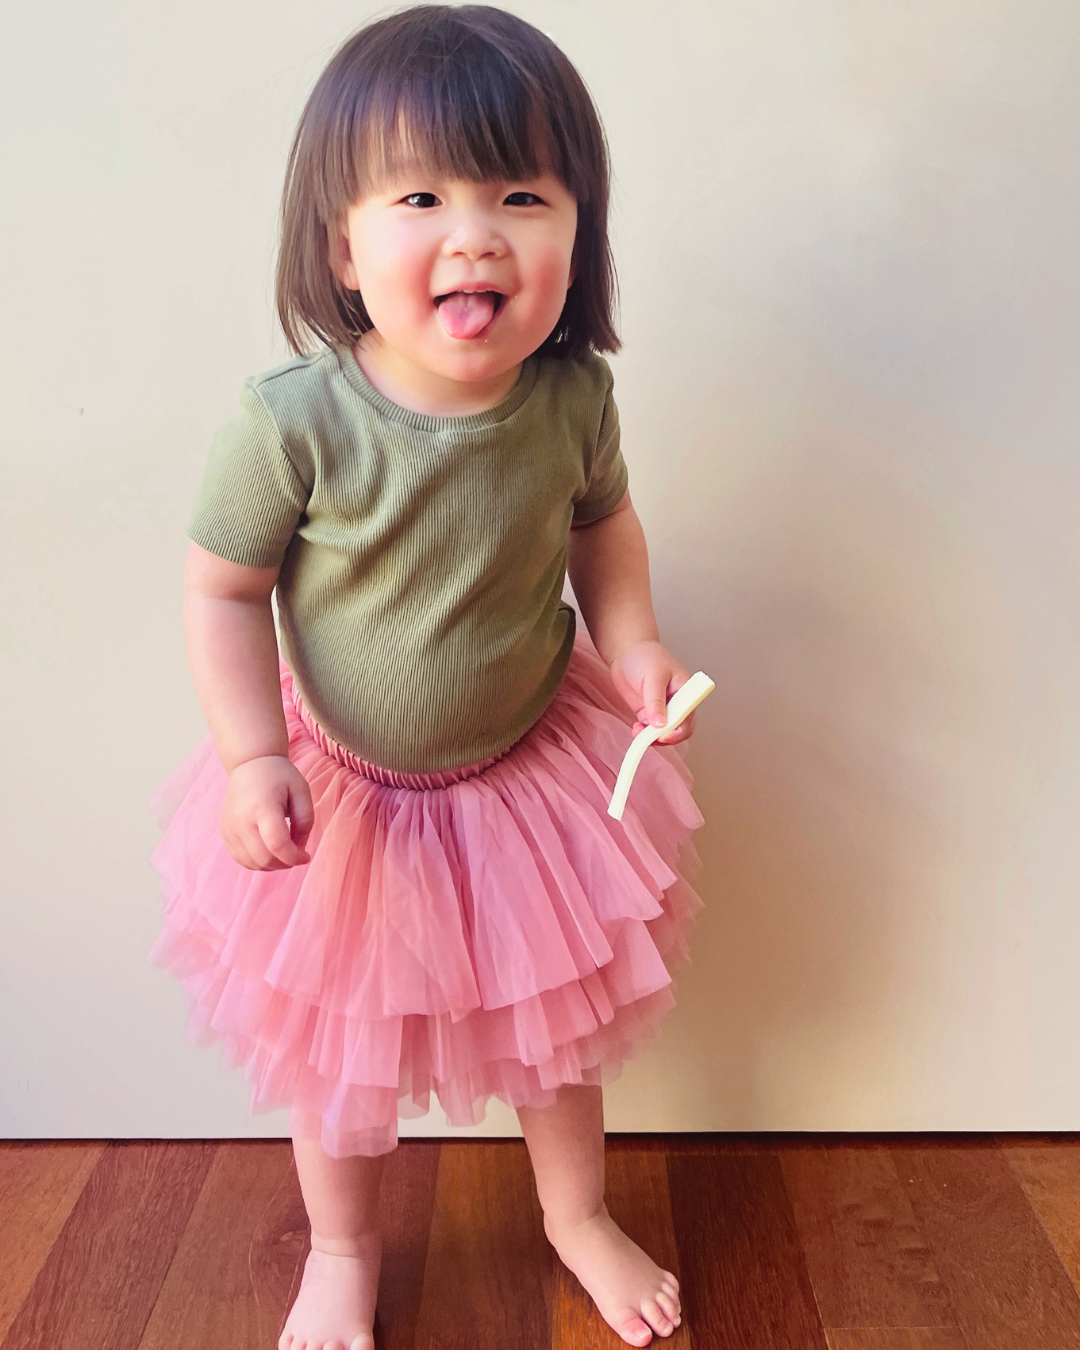 Adorable baby girl modeling our Pale Rose Tutu Skirt. Soft and whimsical toddler fashion for special occasions, play, and more.